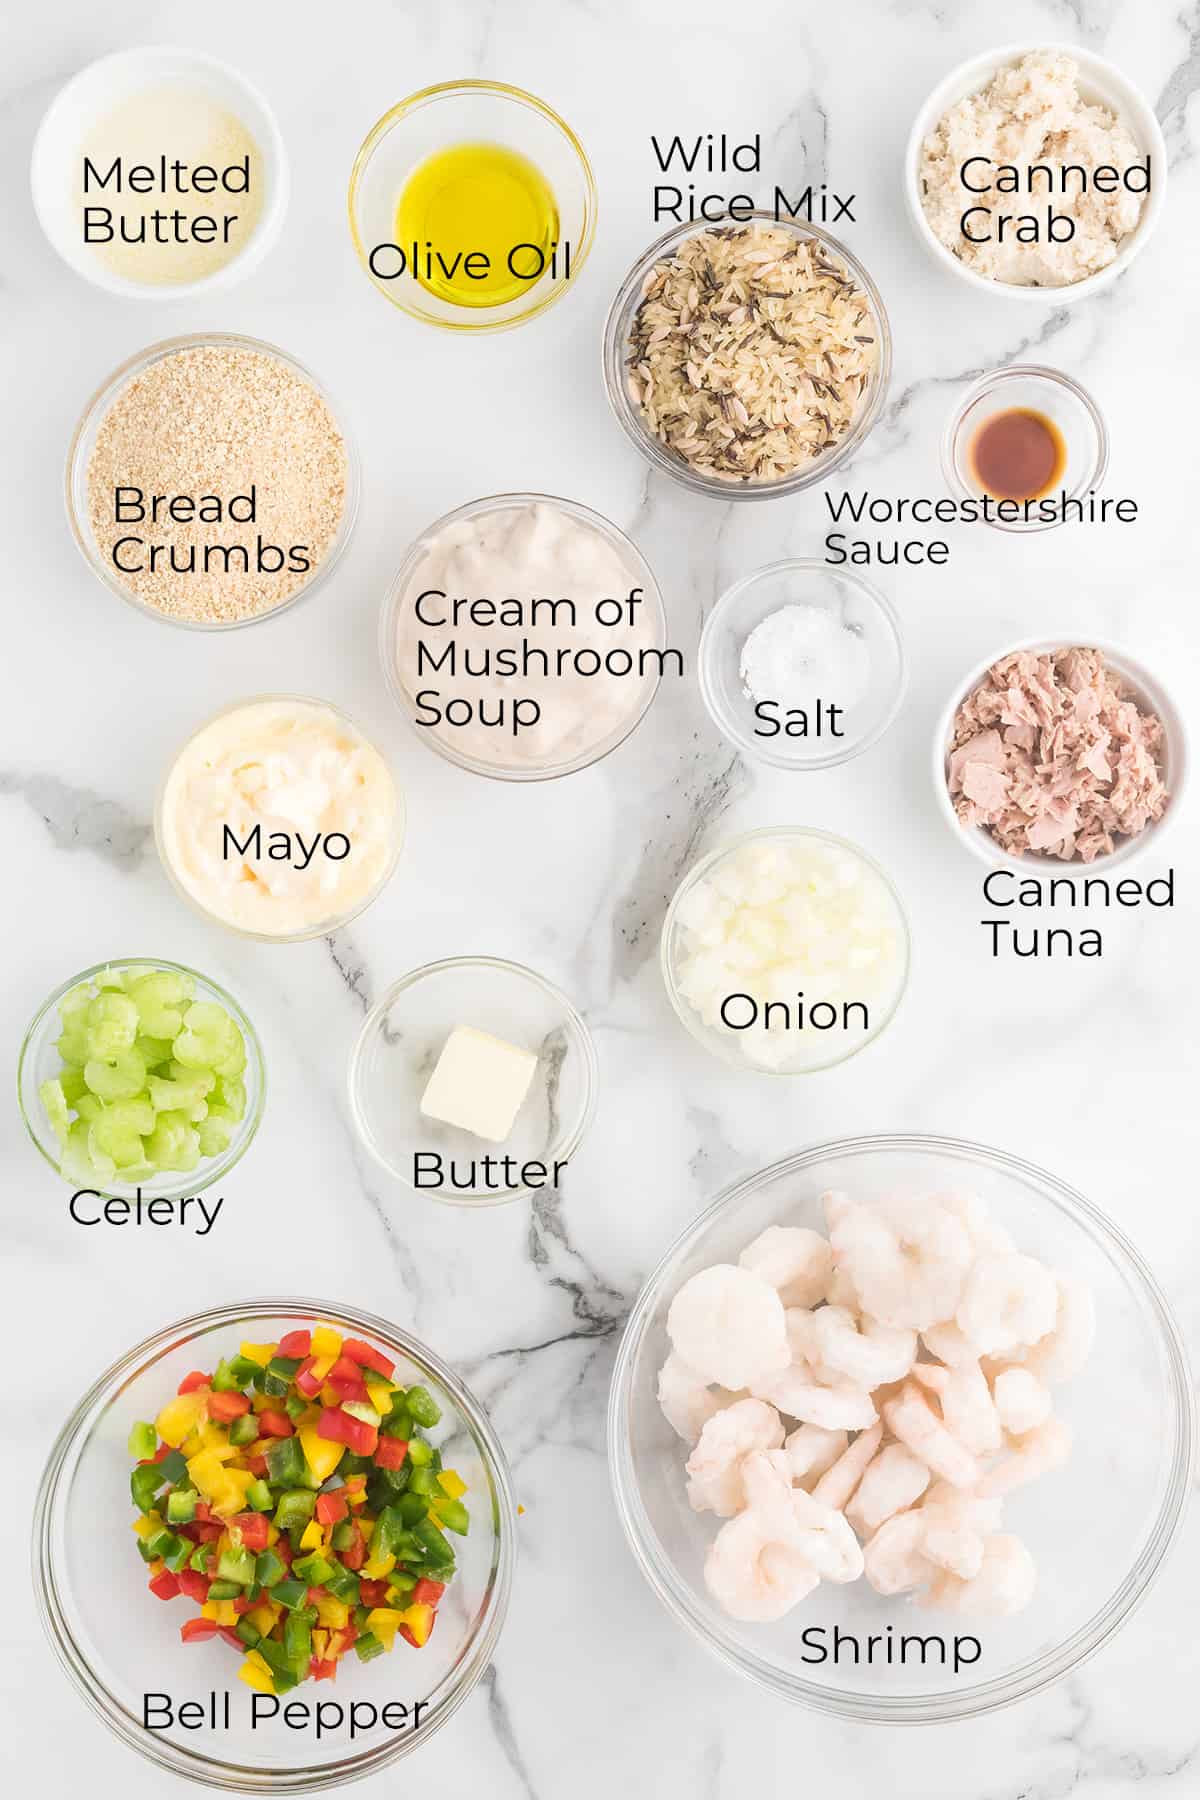 All ingredients needed to make baked seafood casserole.